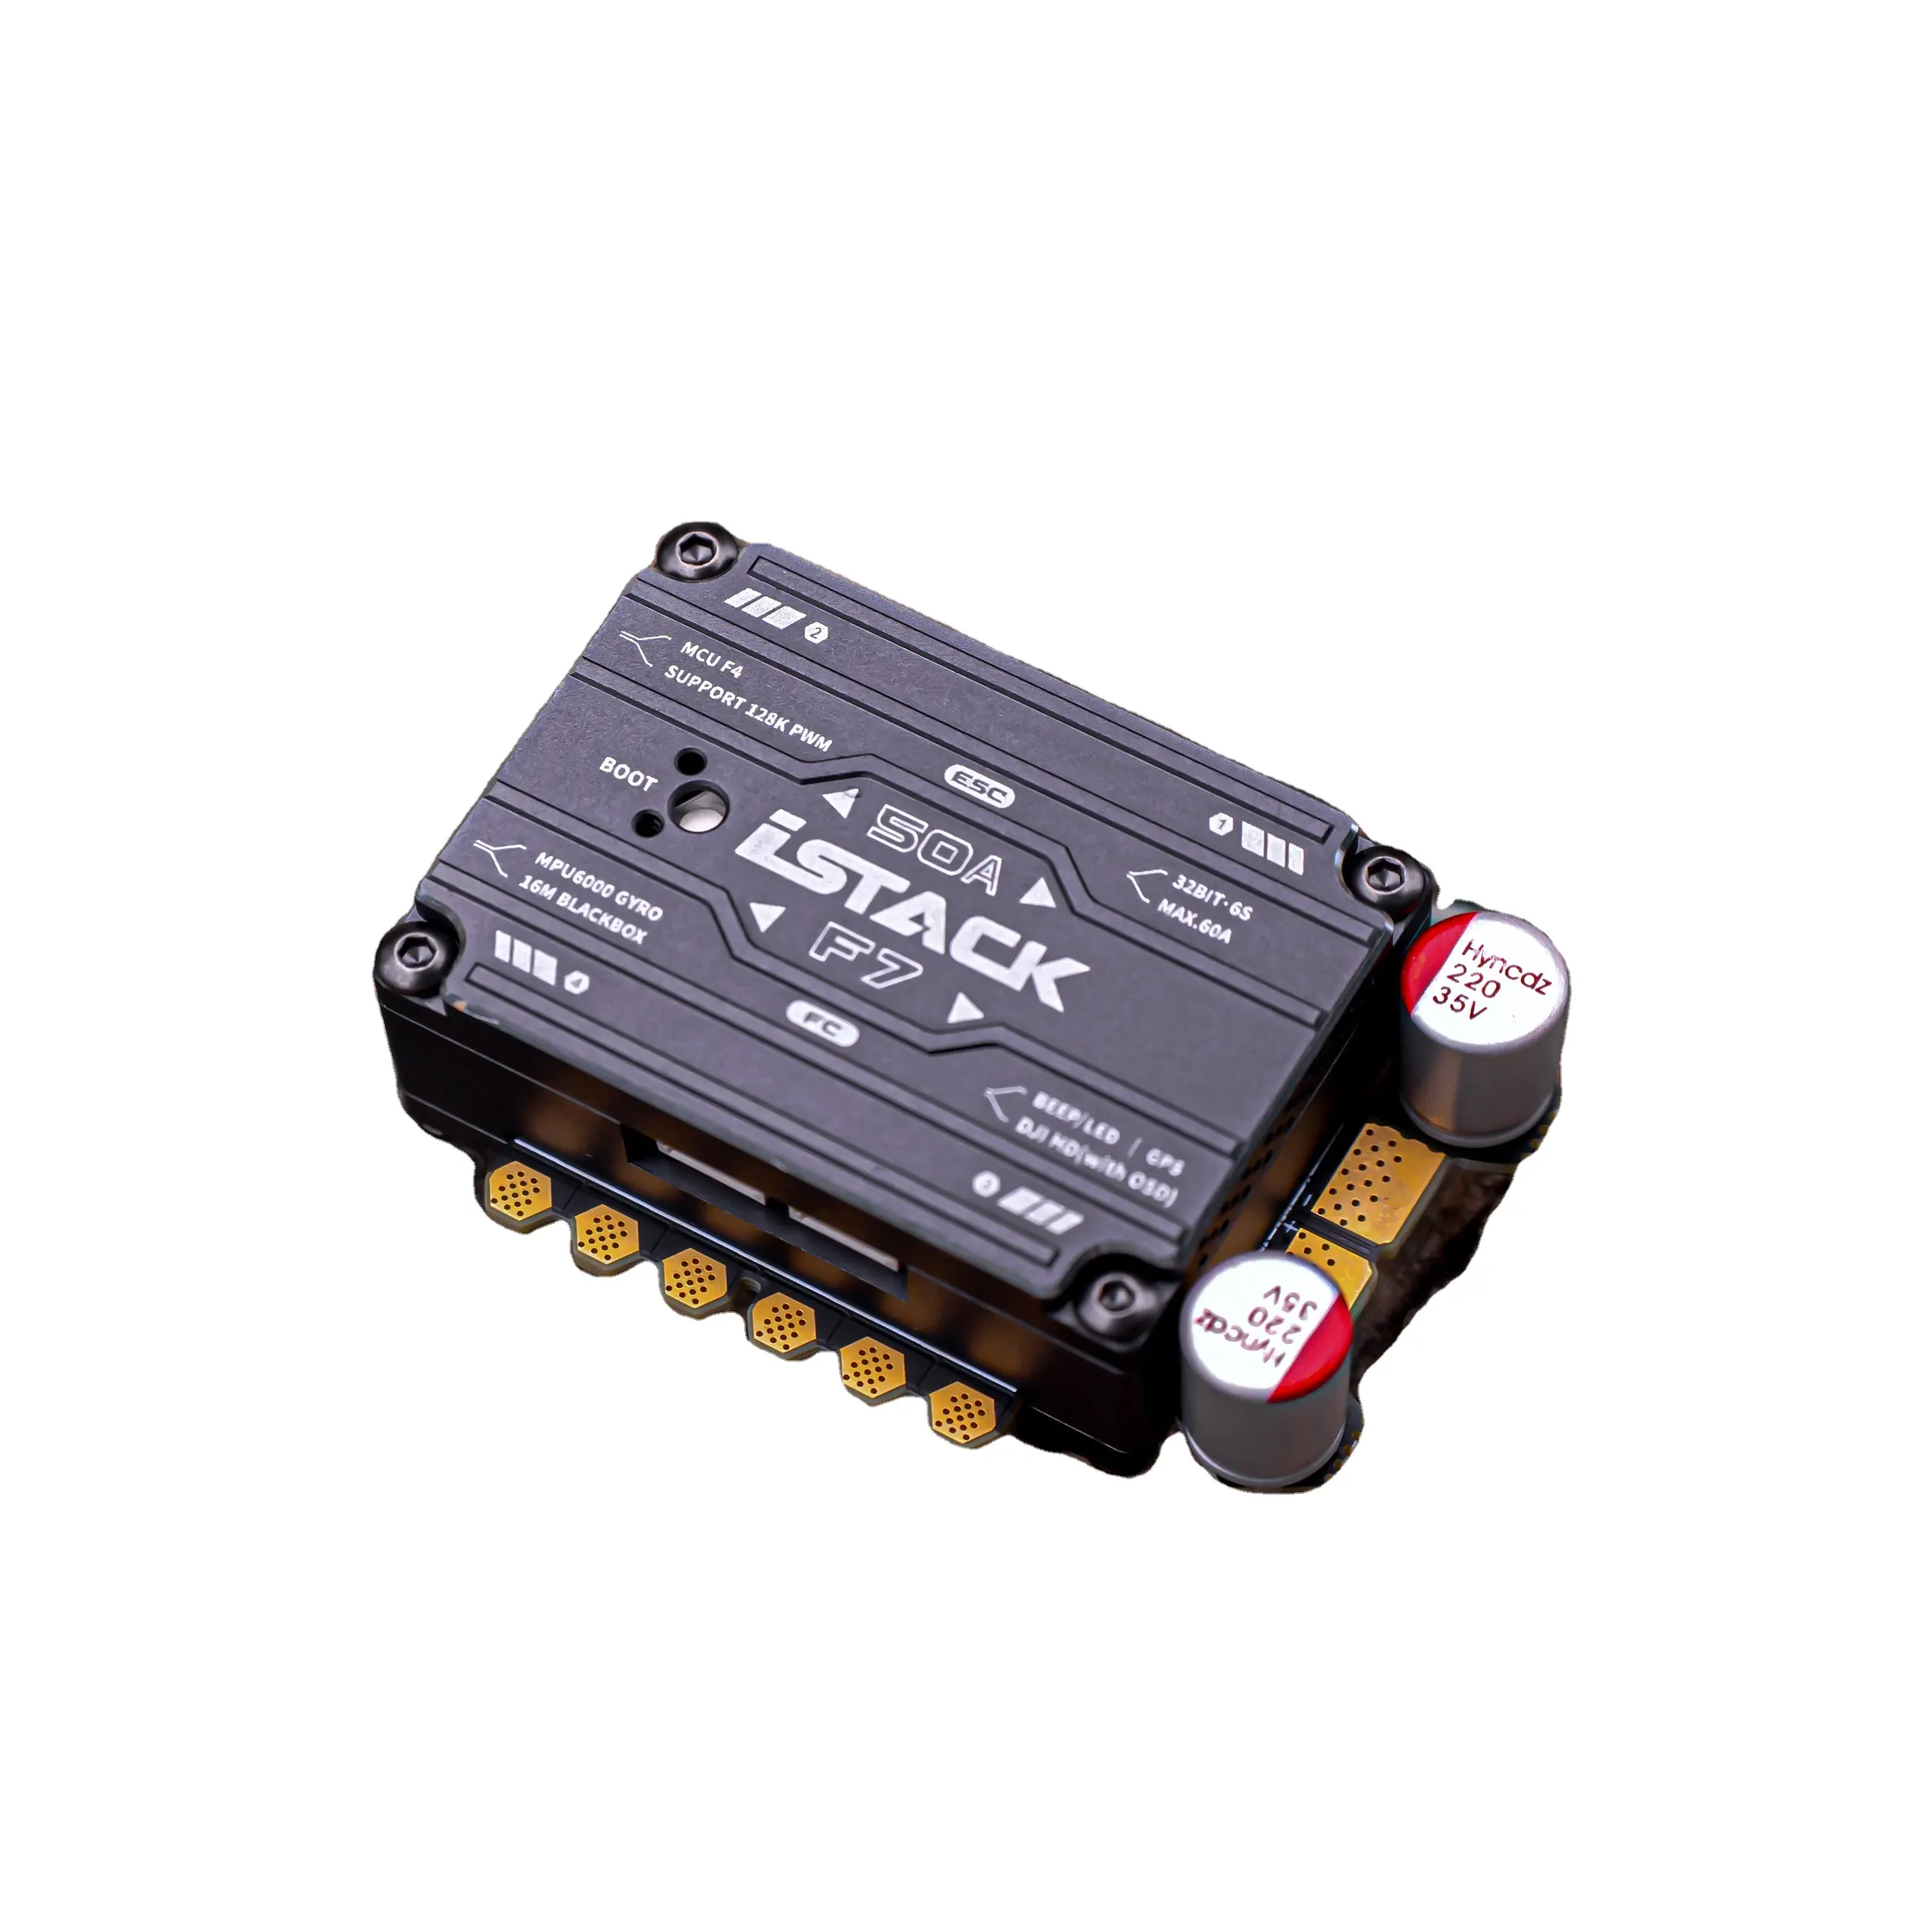 Axisflying Stack 50A+F7 iSTACK Plug-and-Play F7 Flugsteuerung MPU6000 50A 4in1 128K ESC 2-6S für FPV Freestyle Renndrohne